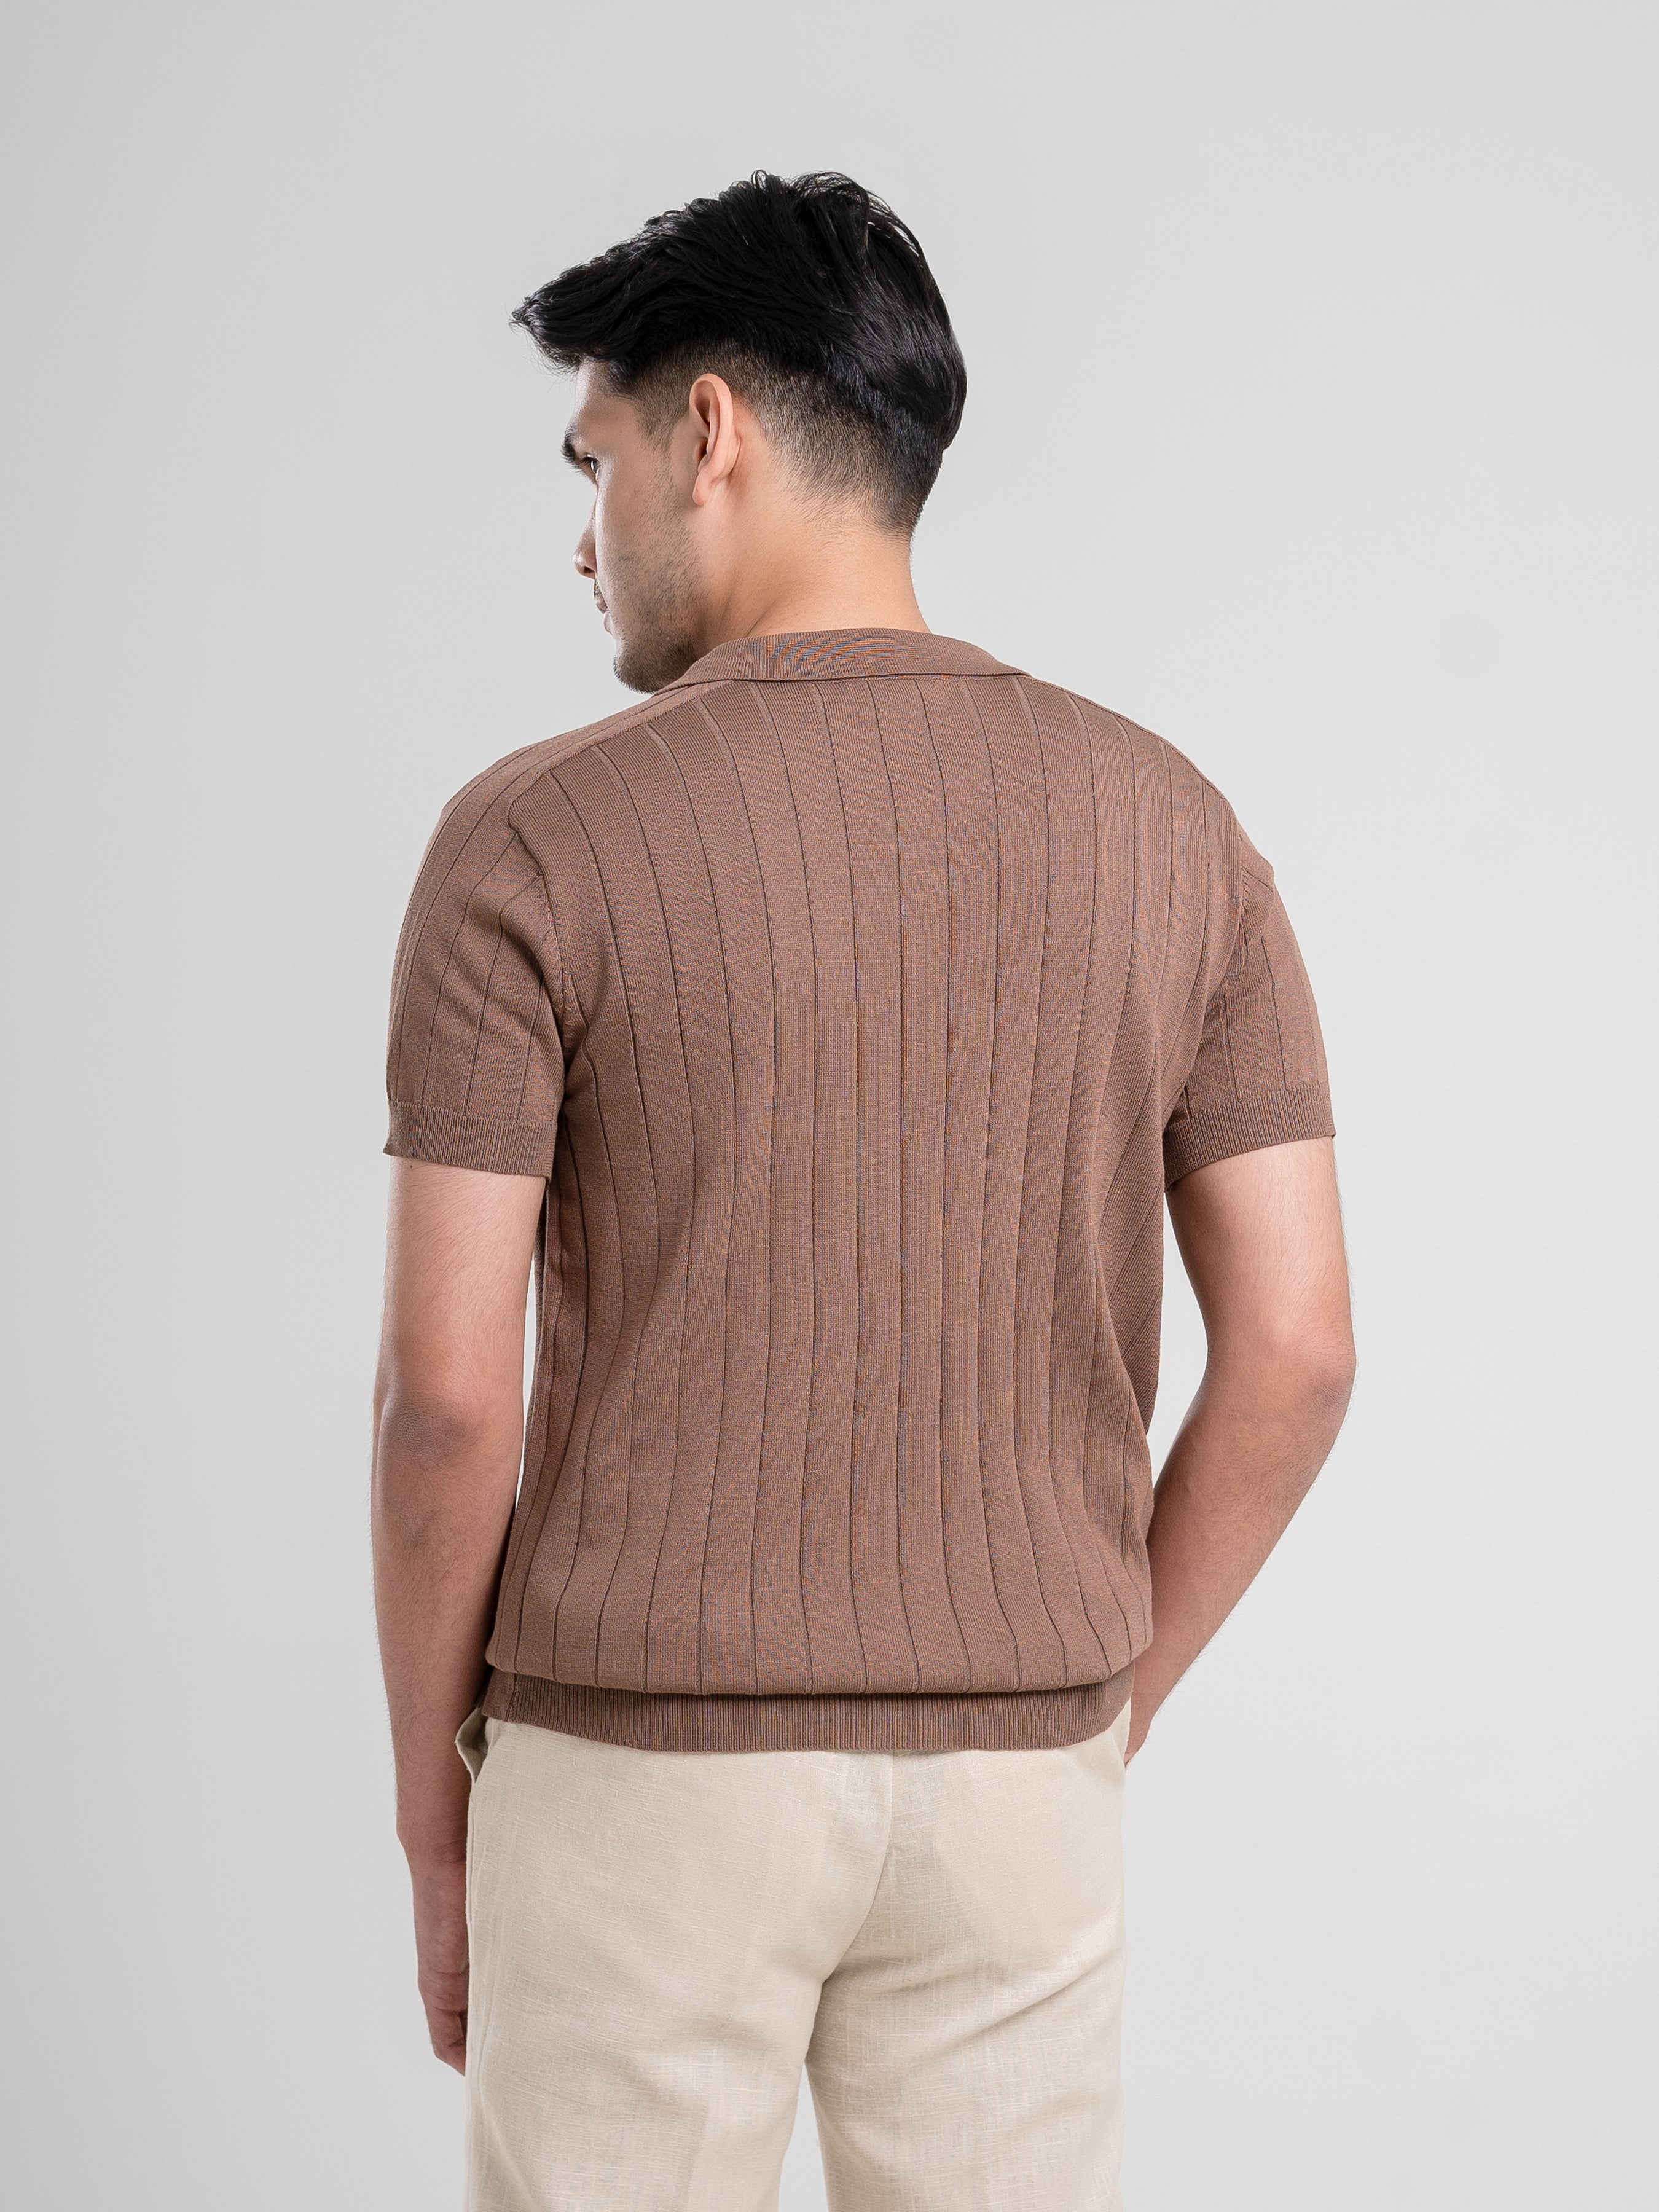 Dylan Knit Tee - Cappuccino